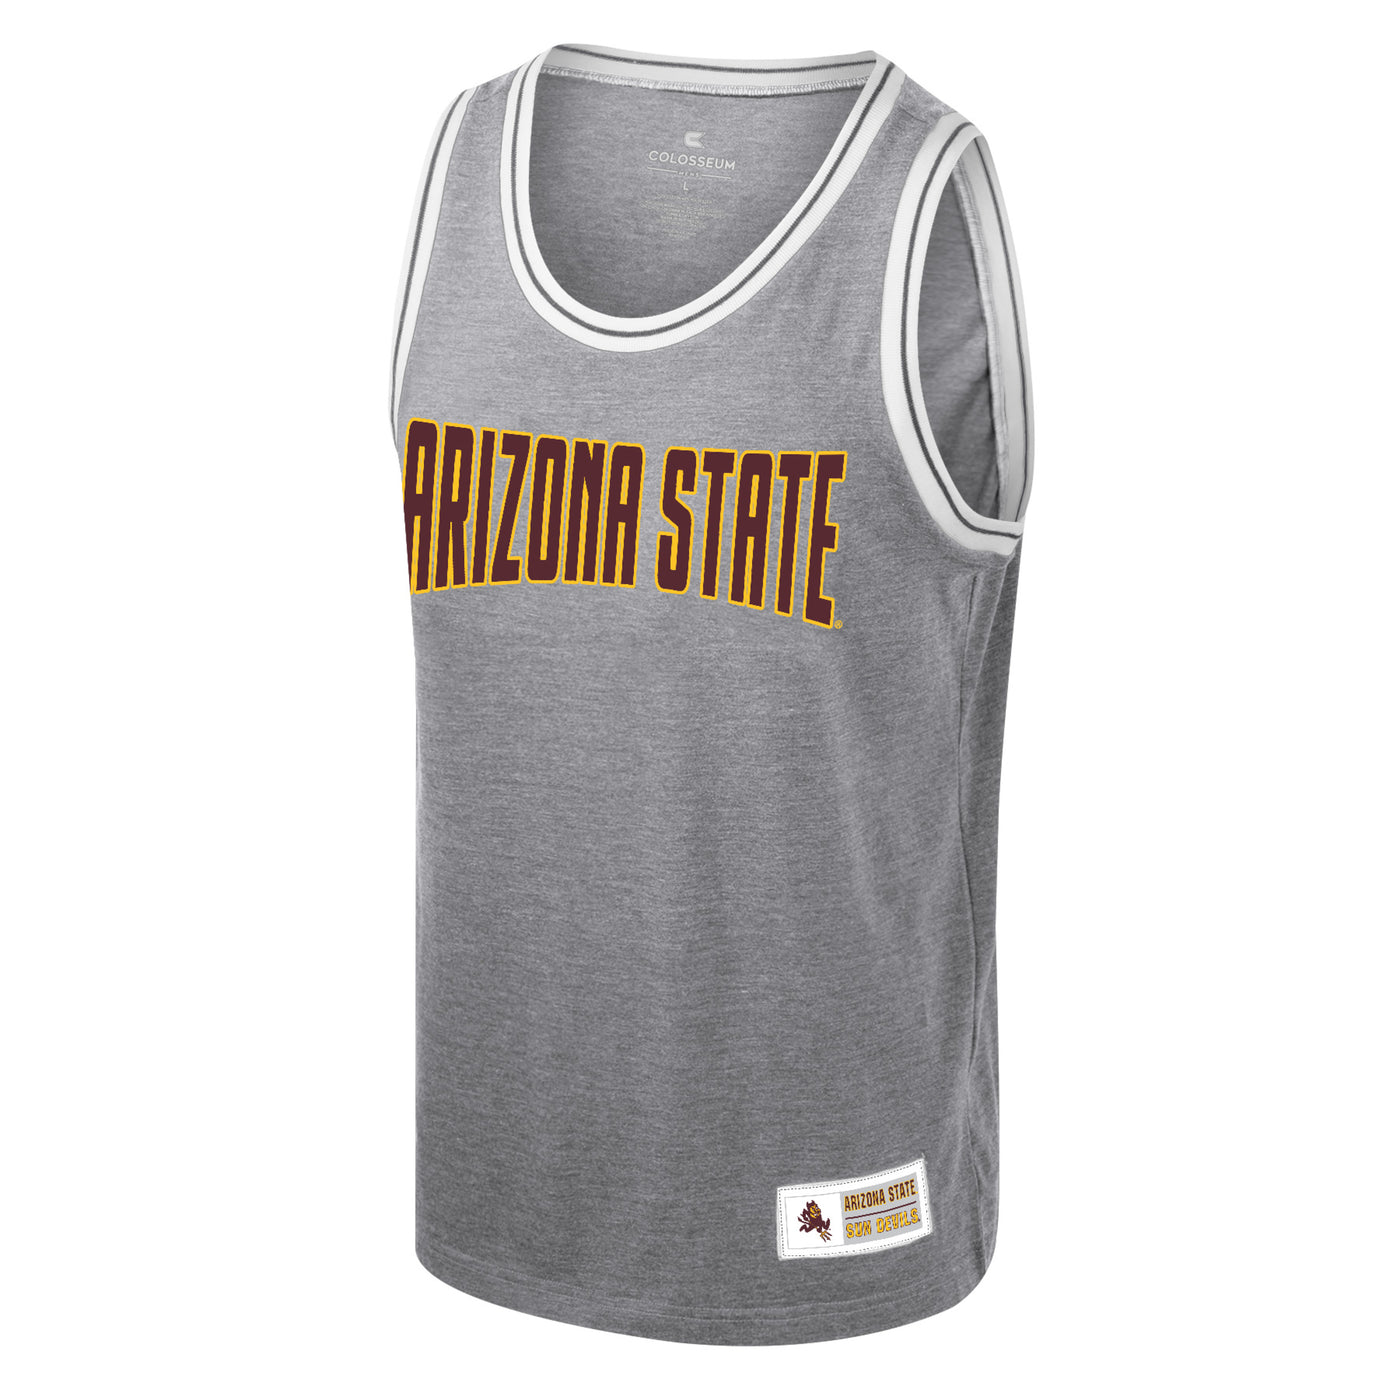 ASU grey mens tank top with white trim around arm and neck lines. the text 